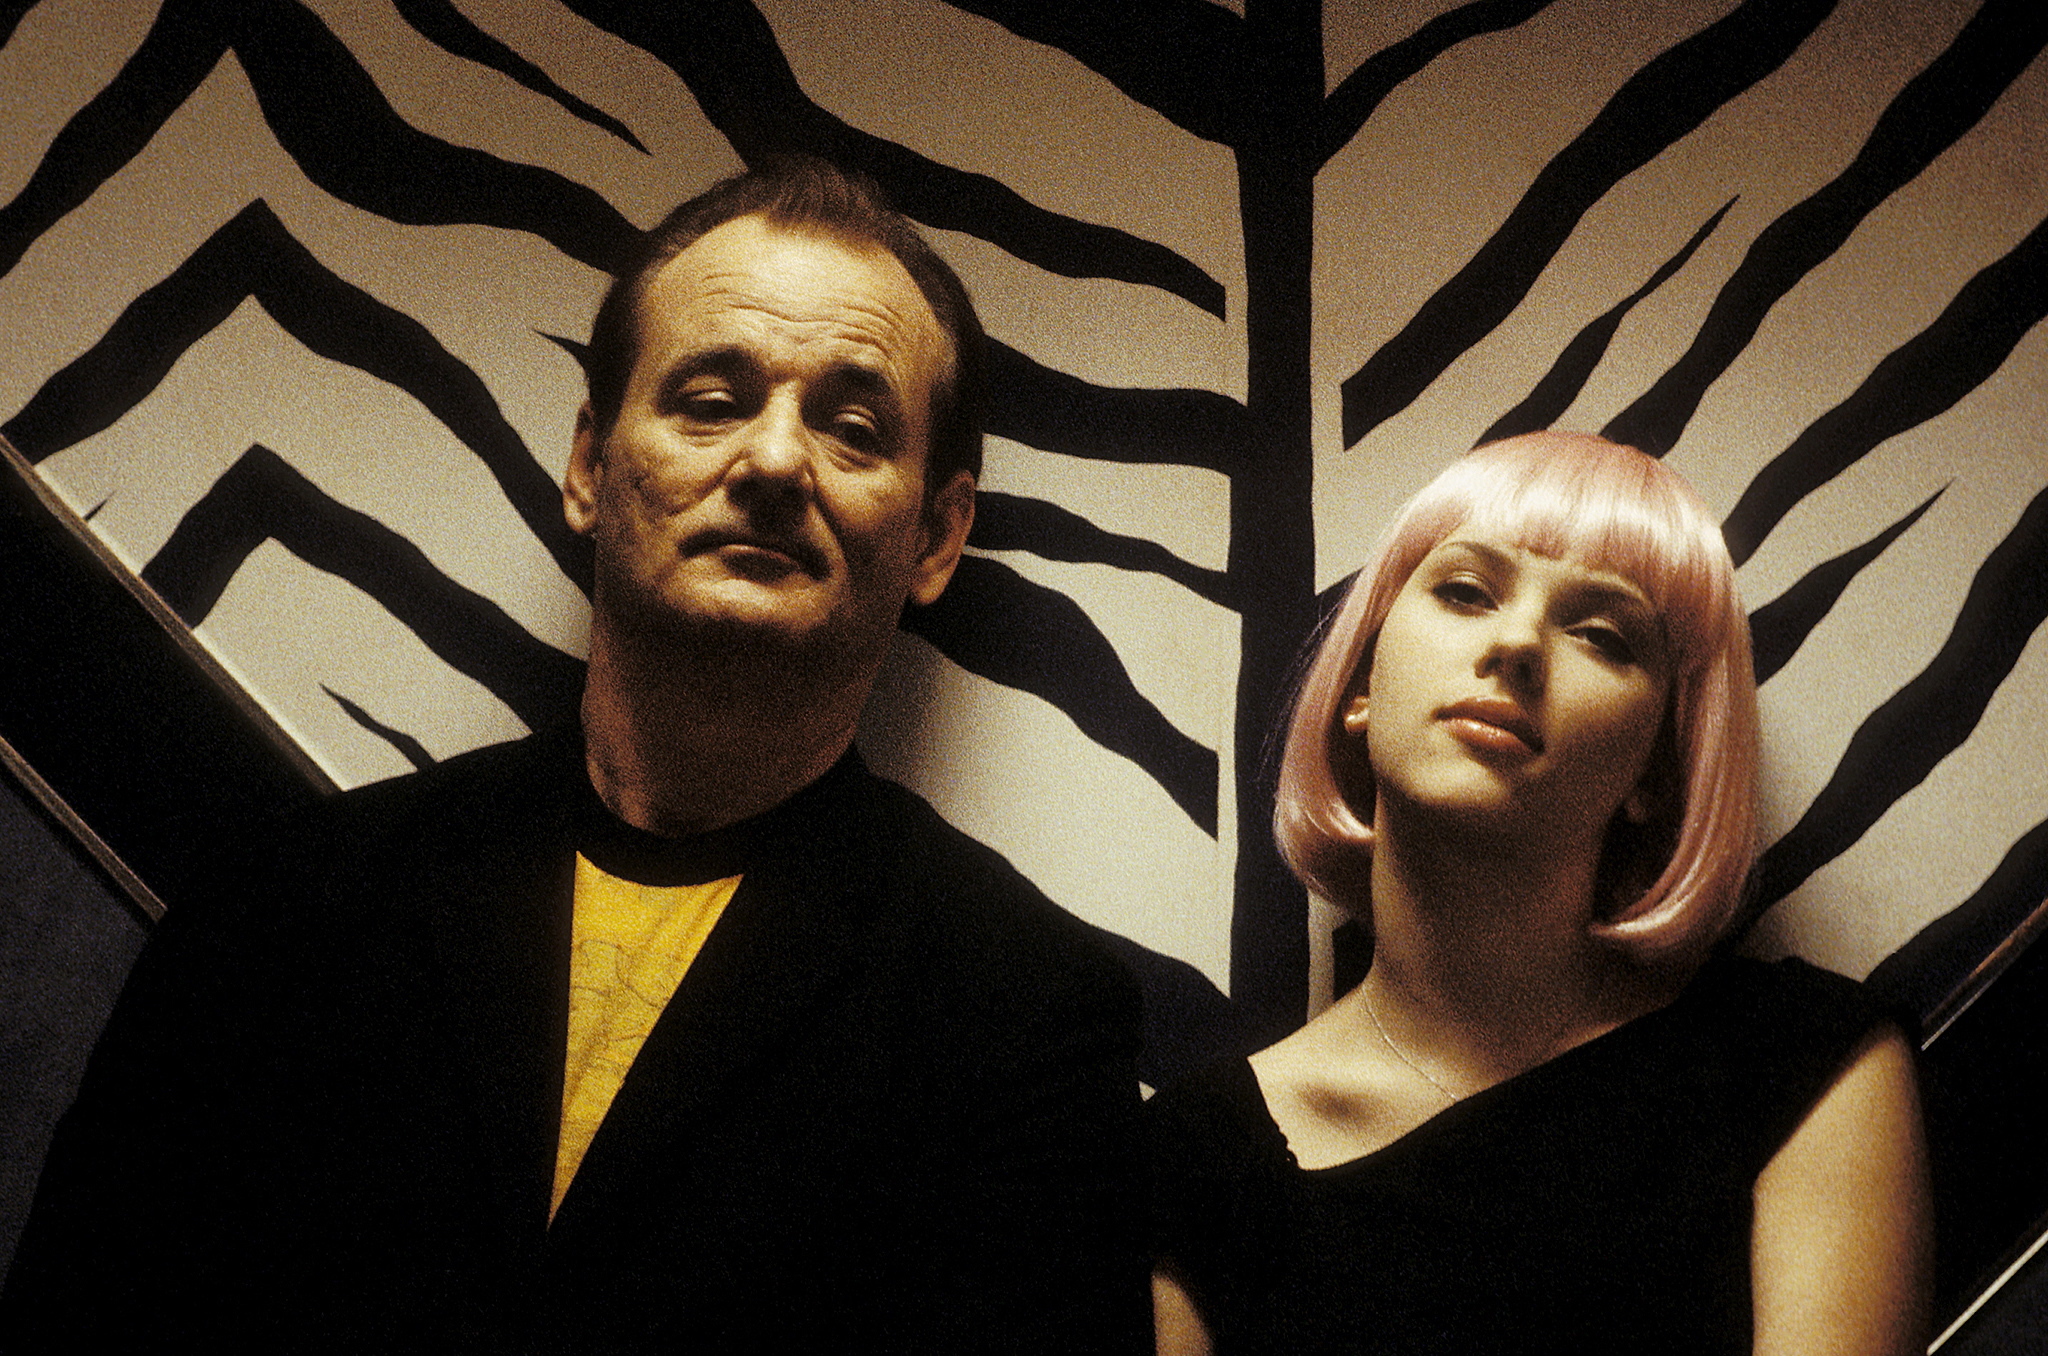 movie review of lost in translation